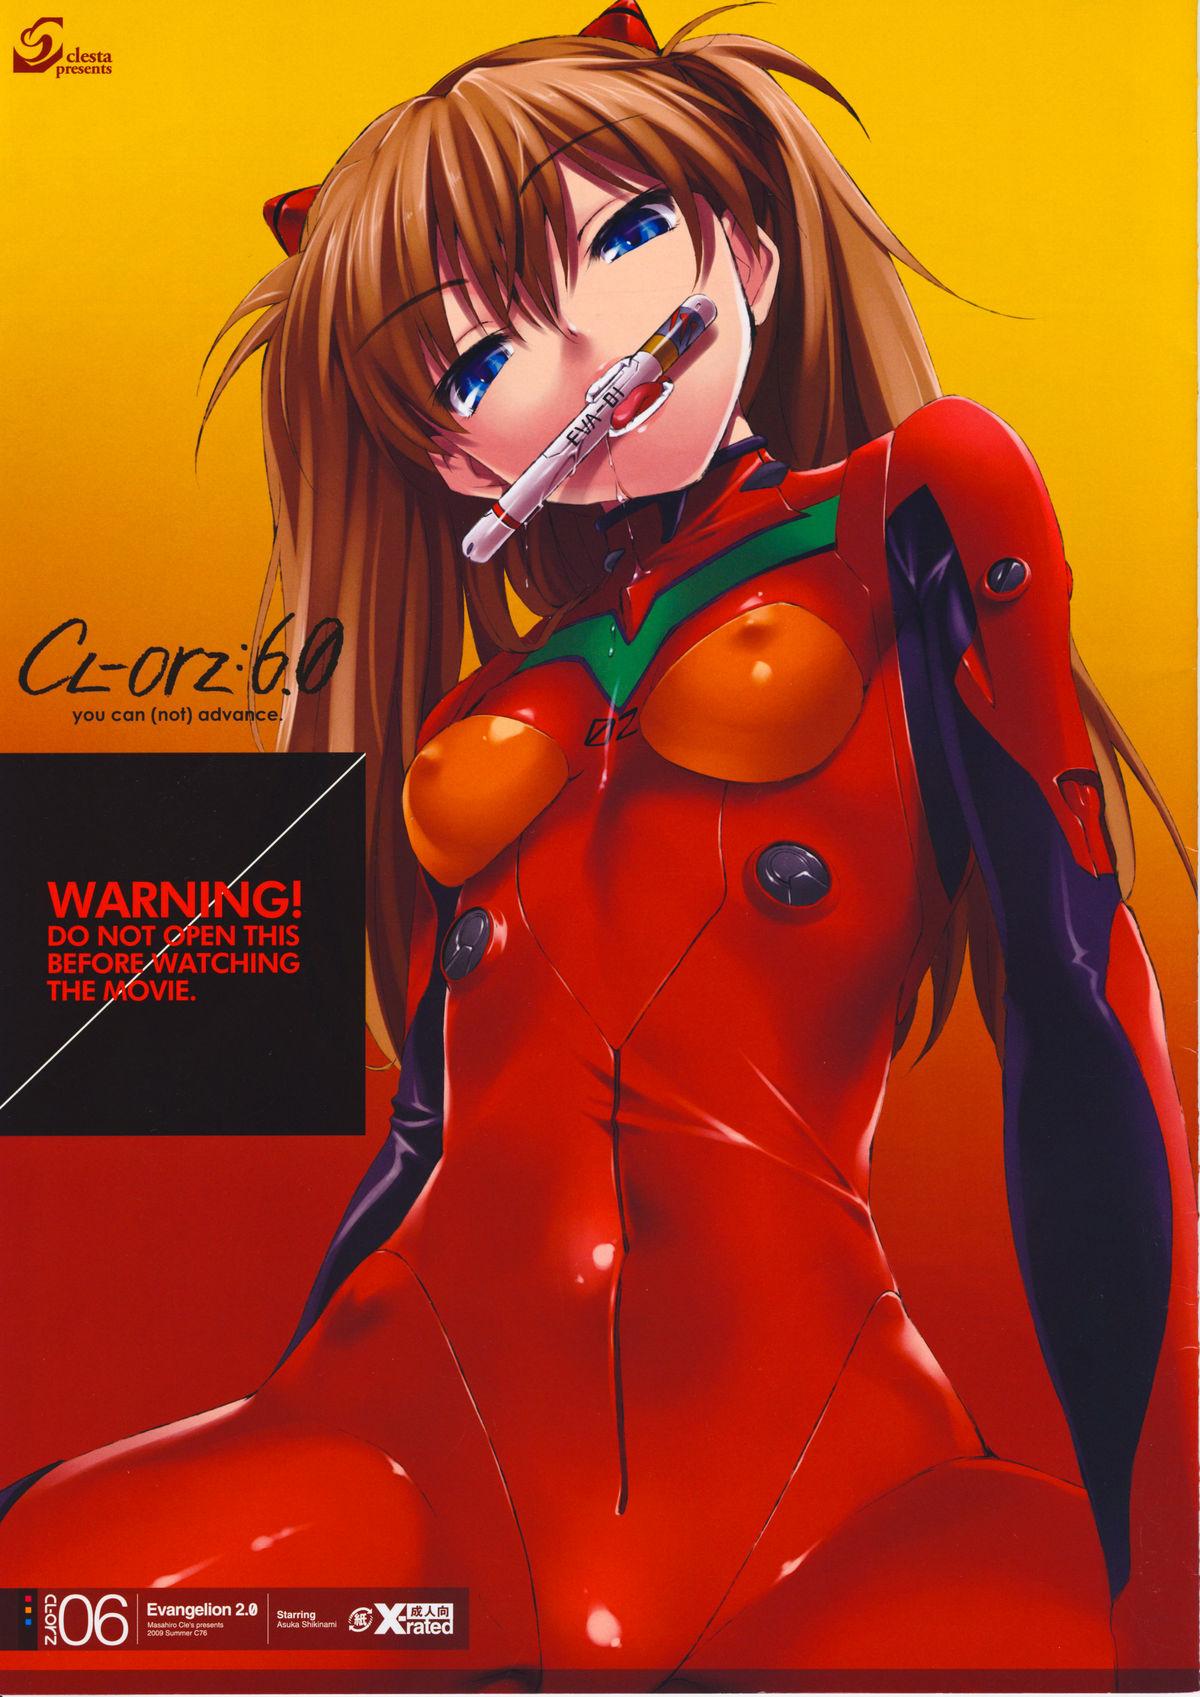 Menage (C76) [Clesta (Cle Masahiro)] CL-orz 6.0 you can (not) advance. (Rebuild of Evangelion) [English] [RedComet] [Decensored] - Neon genesis evangelion Sex - Picture 1